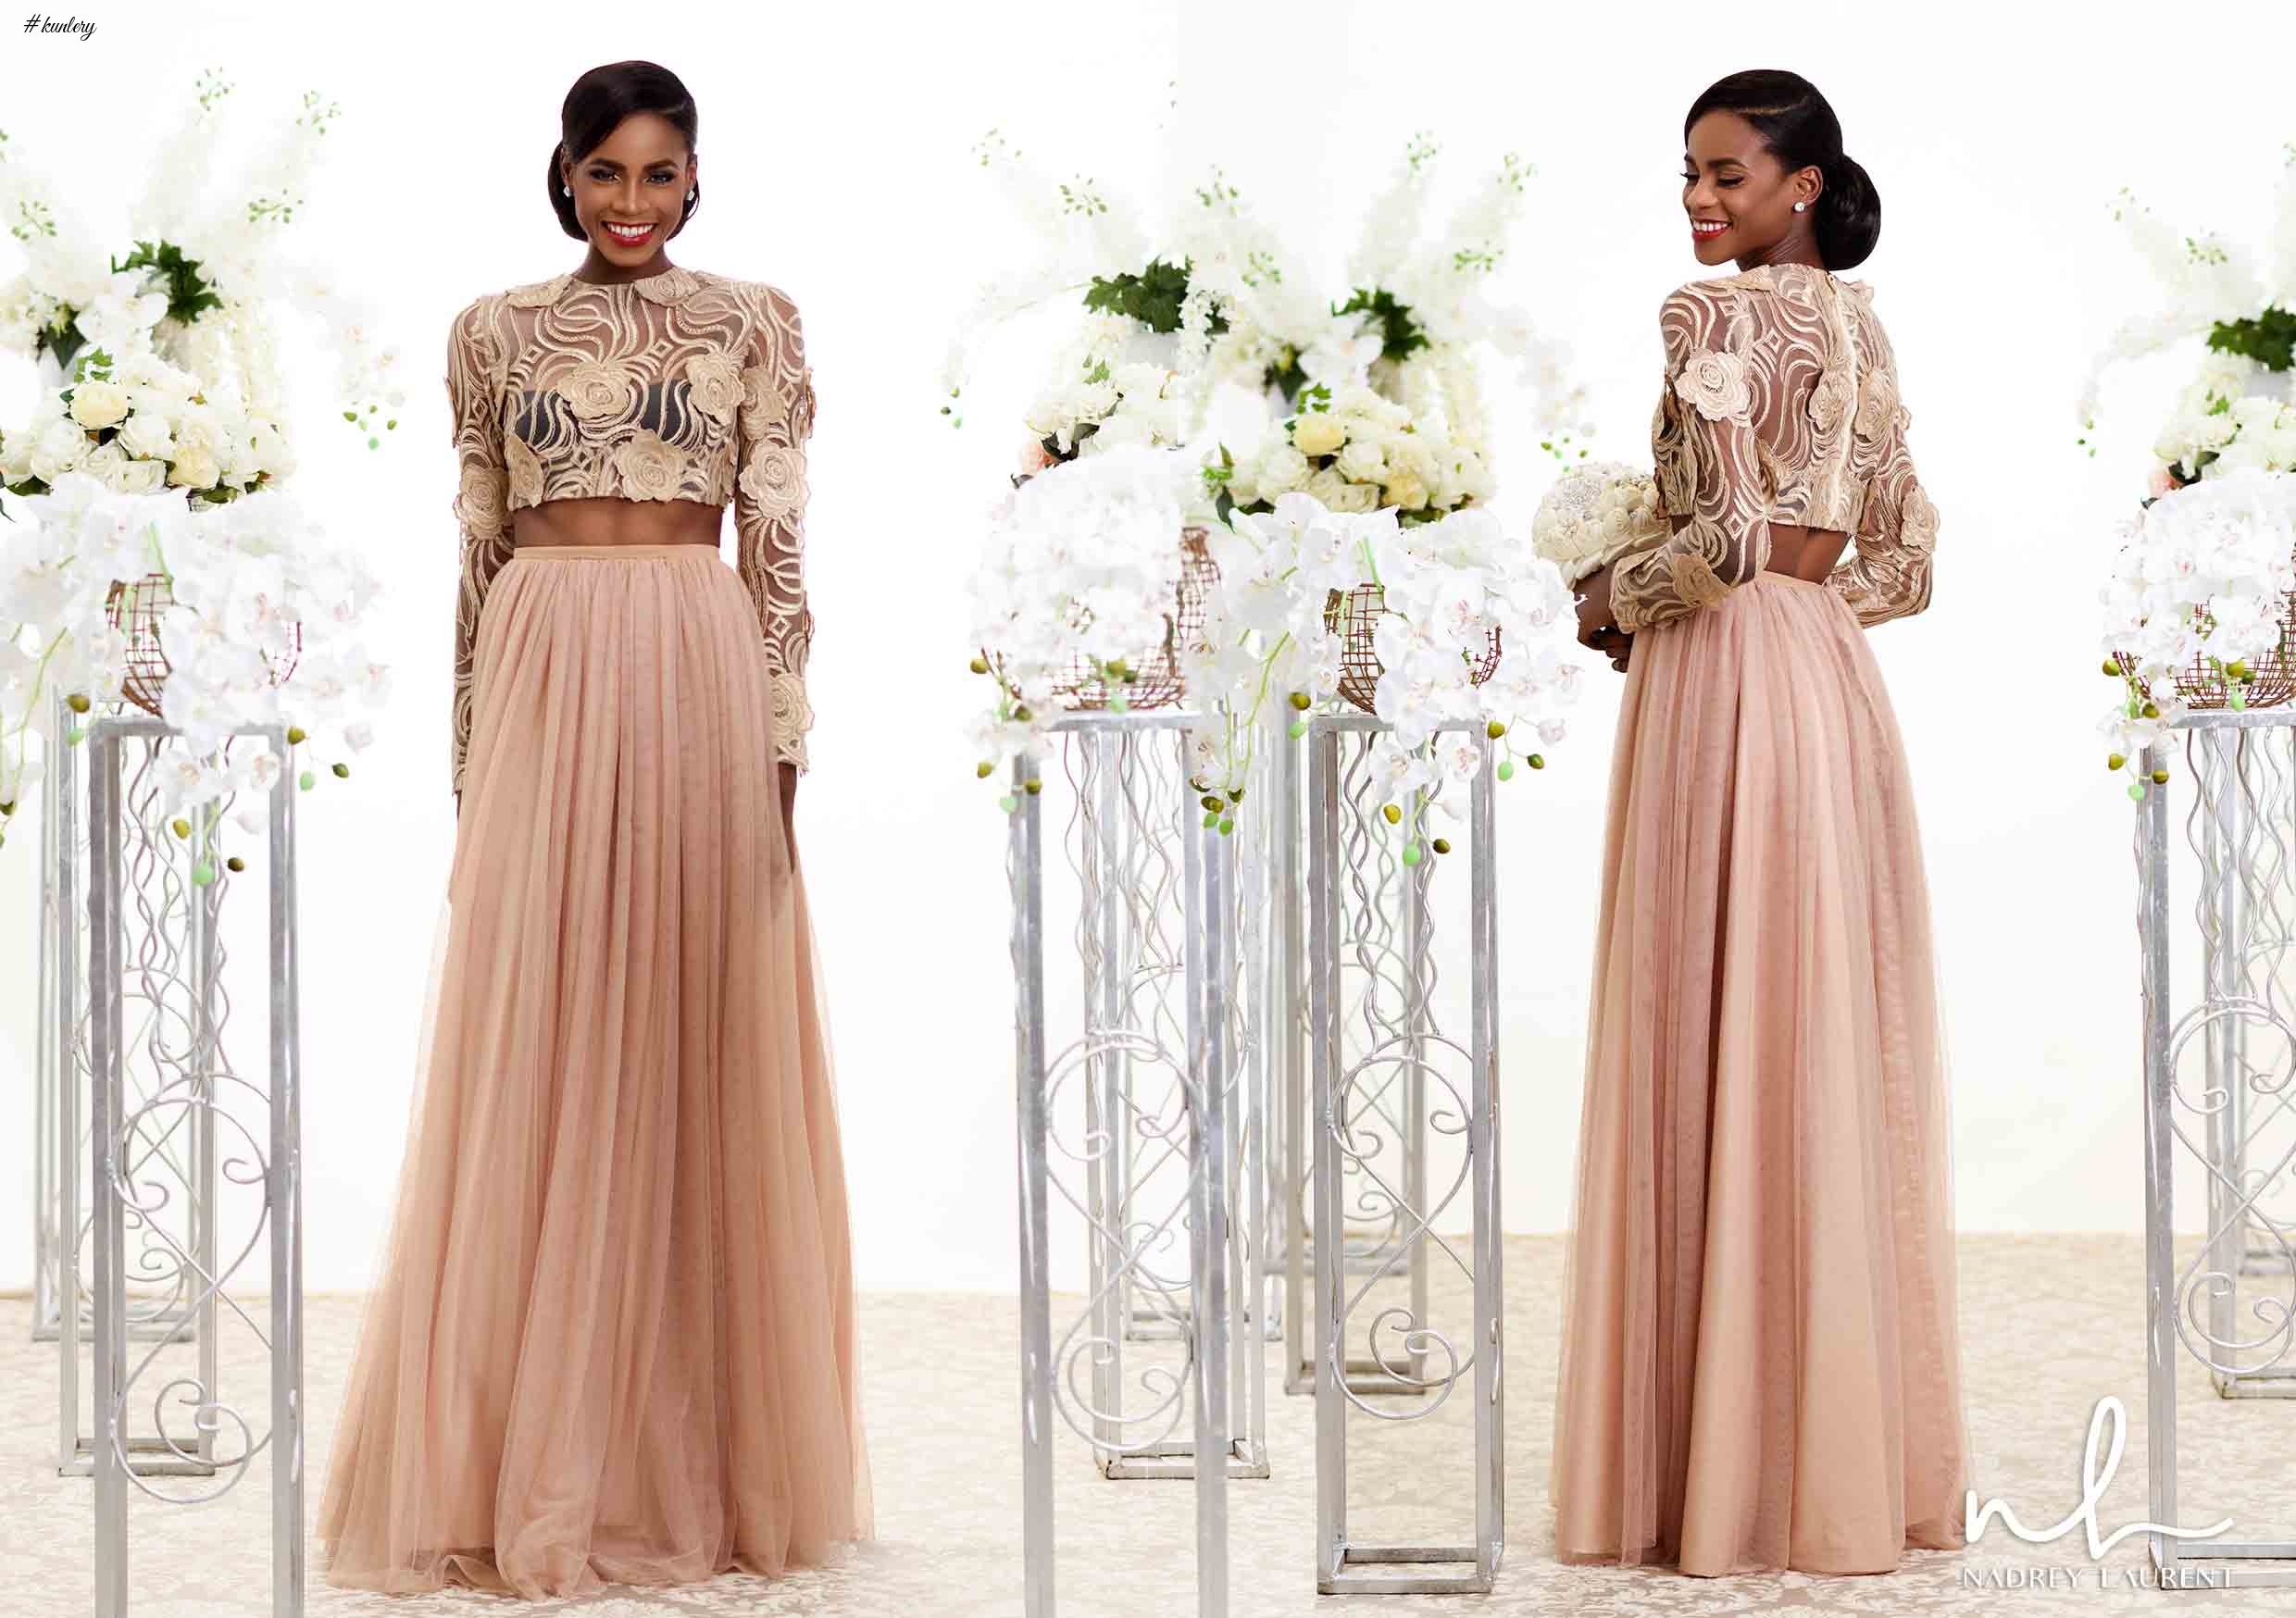 Nadrey Laurent Introduces It’s First Ever Bridal Collection Themed “The Bride”